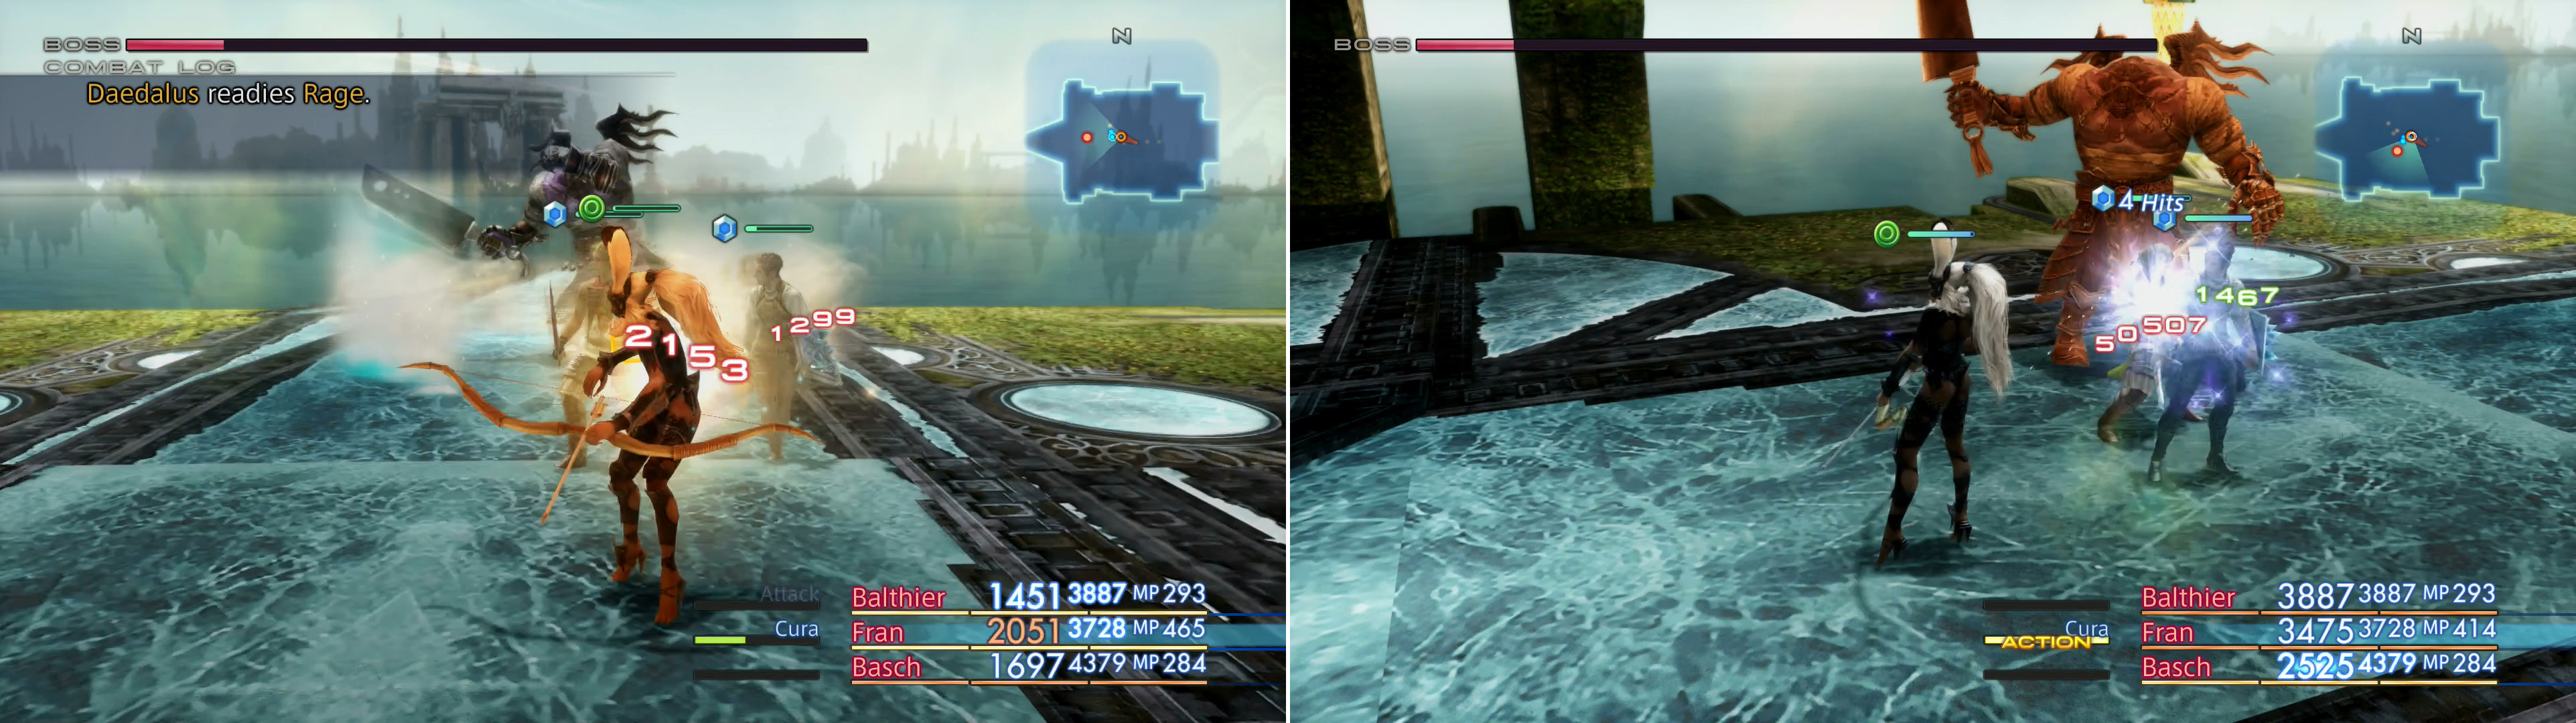 When low on HP Daedalus will start using more devastating attacks (left) and his combo rate will increase dramatically (right).